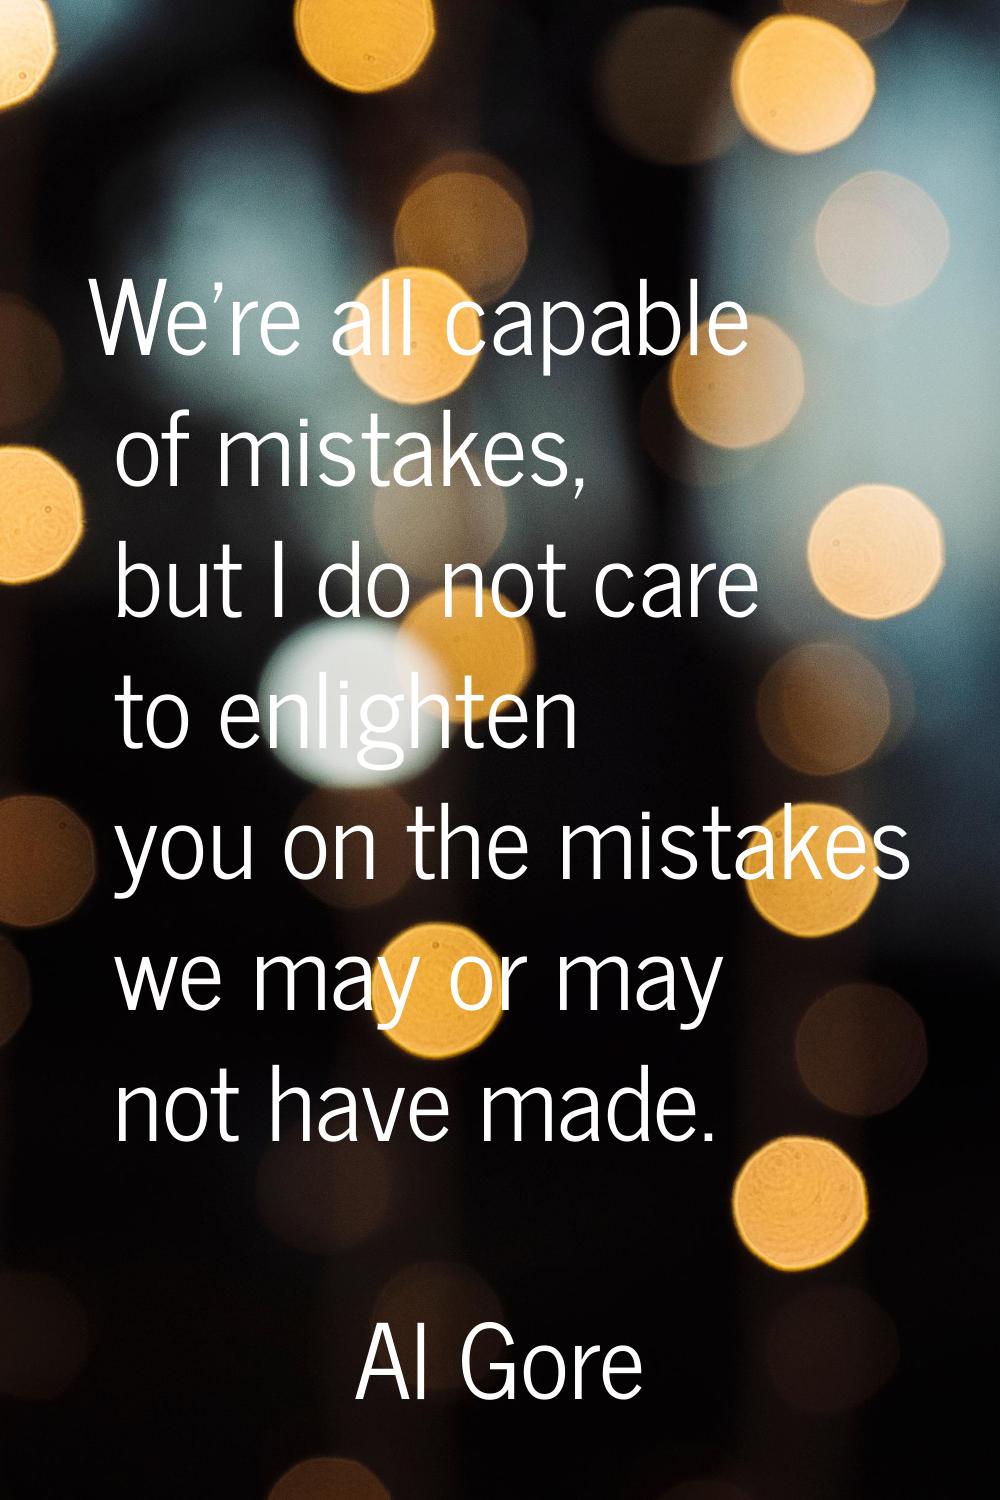 We're all capable of mistakes, but I do not care to enlighten you on the mistakes we may or may not